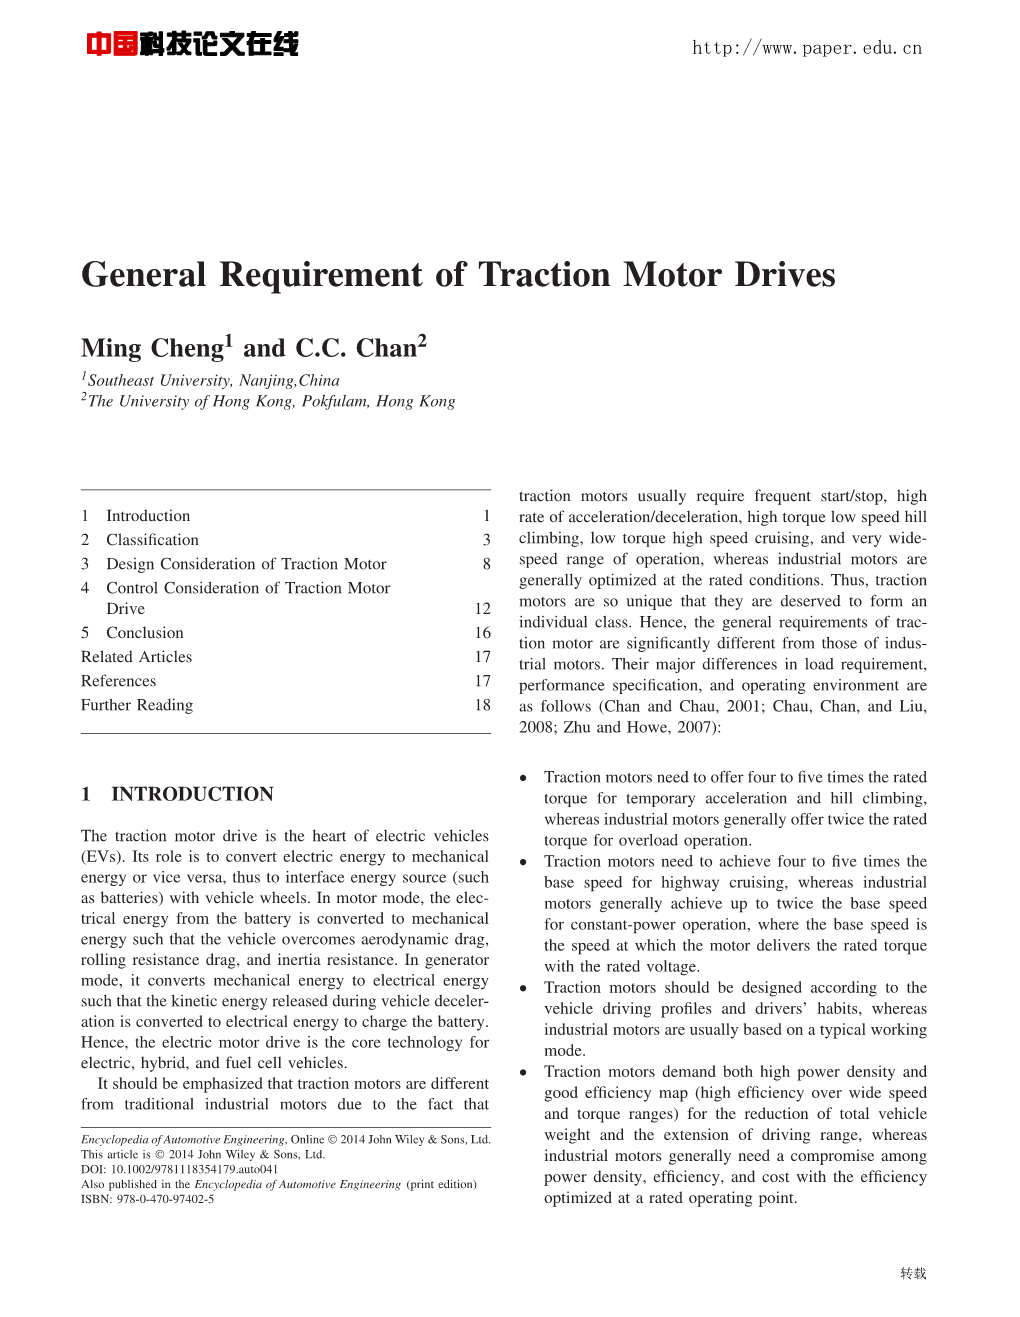 "General Requirement of Traction Motor Drives" In